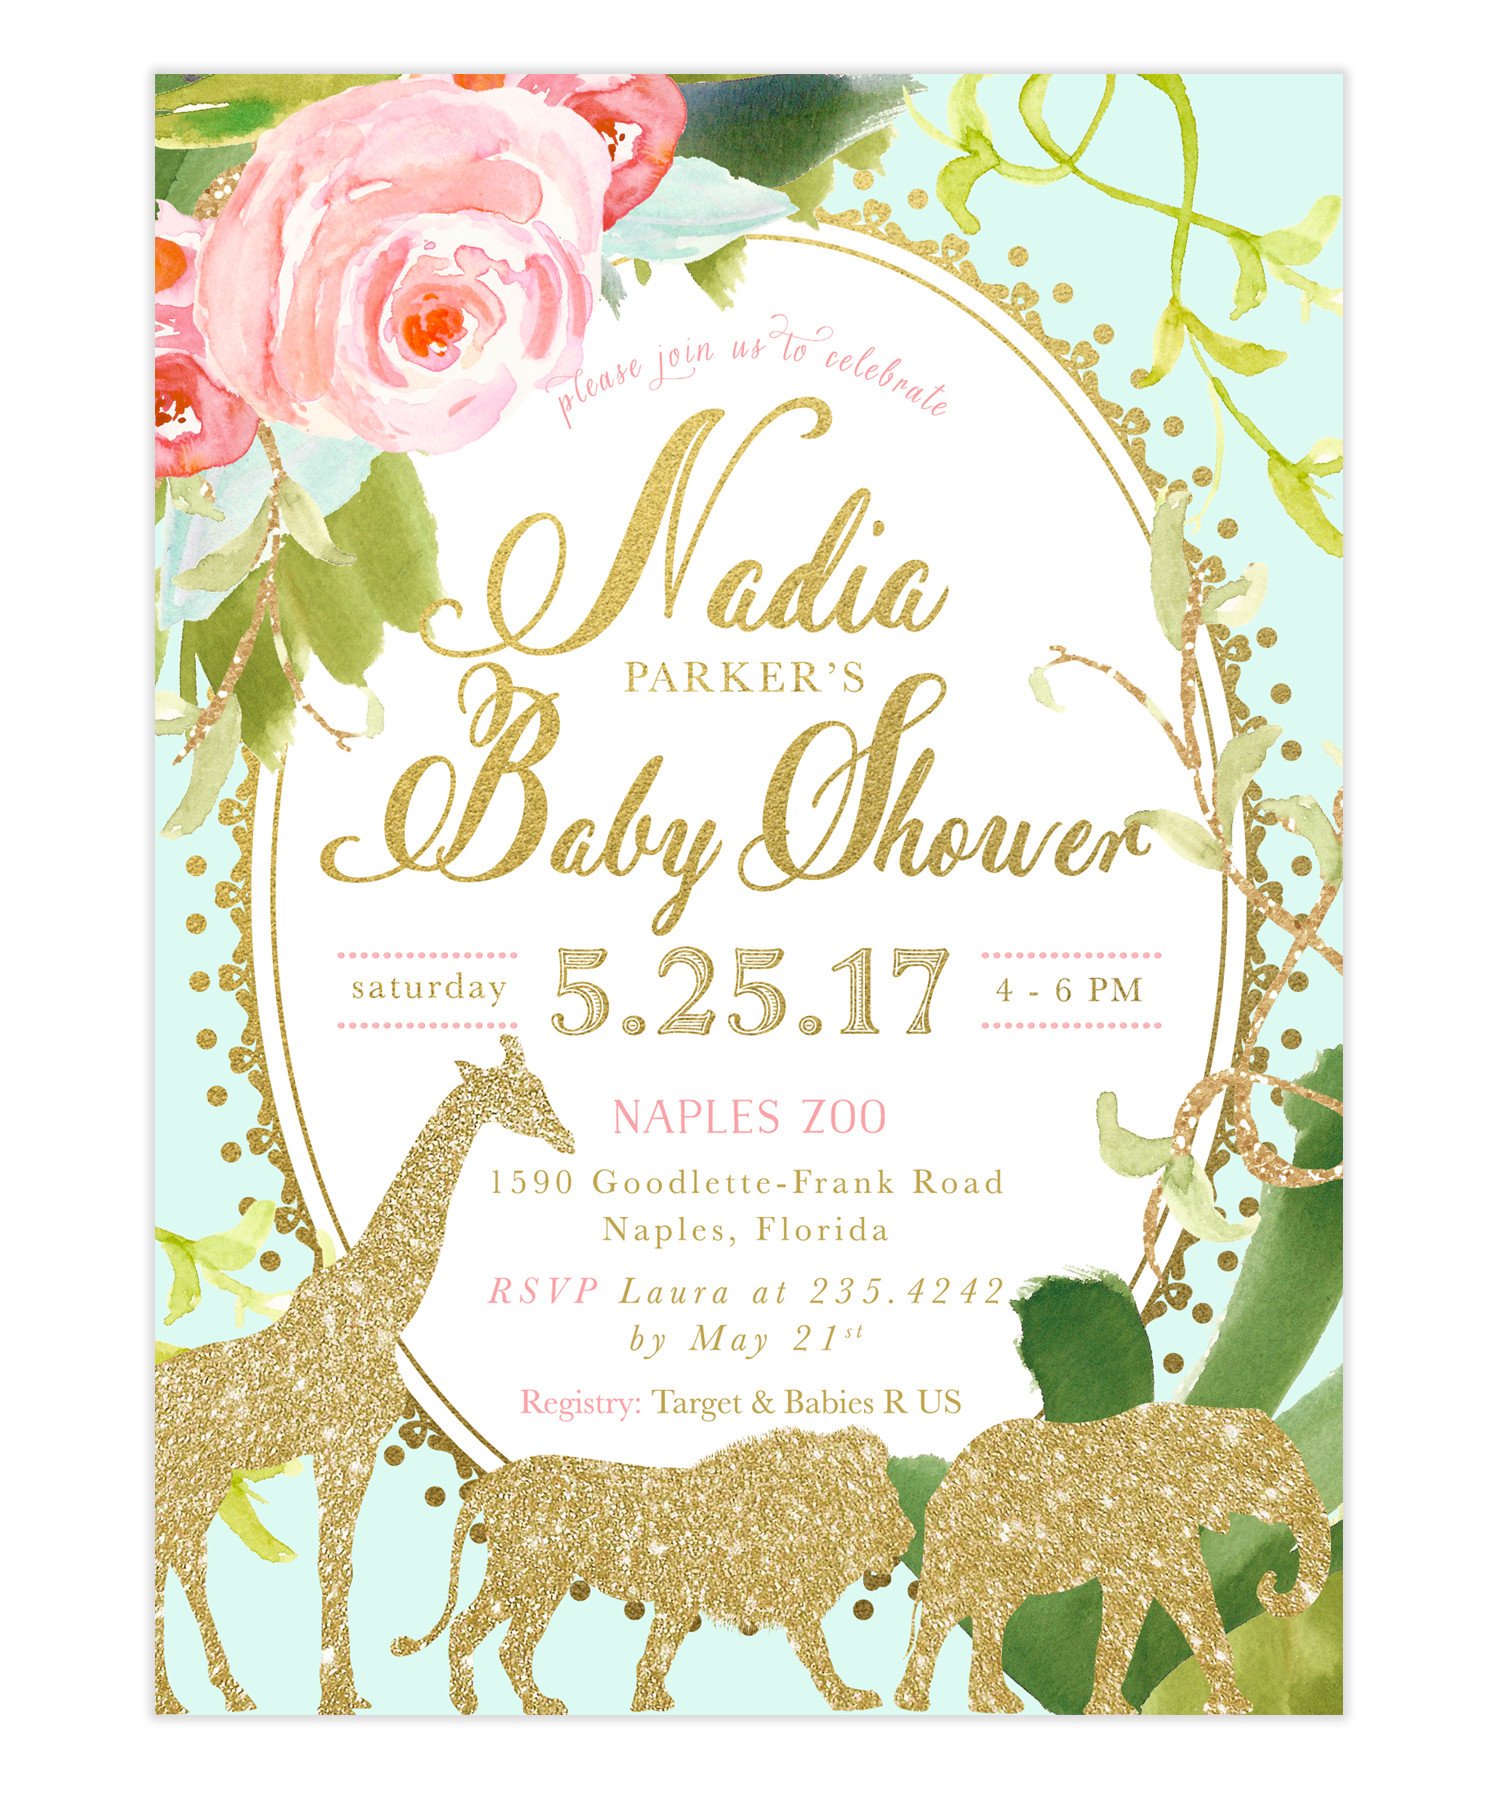 Full Size of Baby Shower:unique Baby Shower Ideas Pinterest Baby Shower Ideas For Girls Baby Girl Themes For Bedroom Unique Baby Shower Decorations Homemade Baby Shower Decorations Unique Baby Shower Themes Nautical Baby Shower Invitations For Boys Printable Baby Shower Invitations For Girl